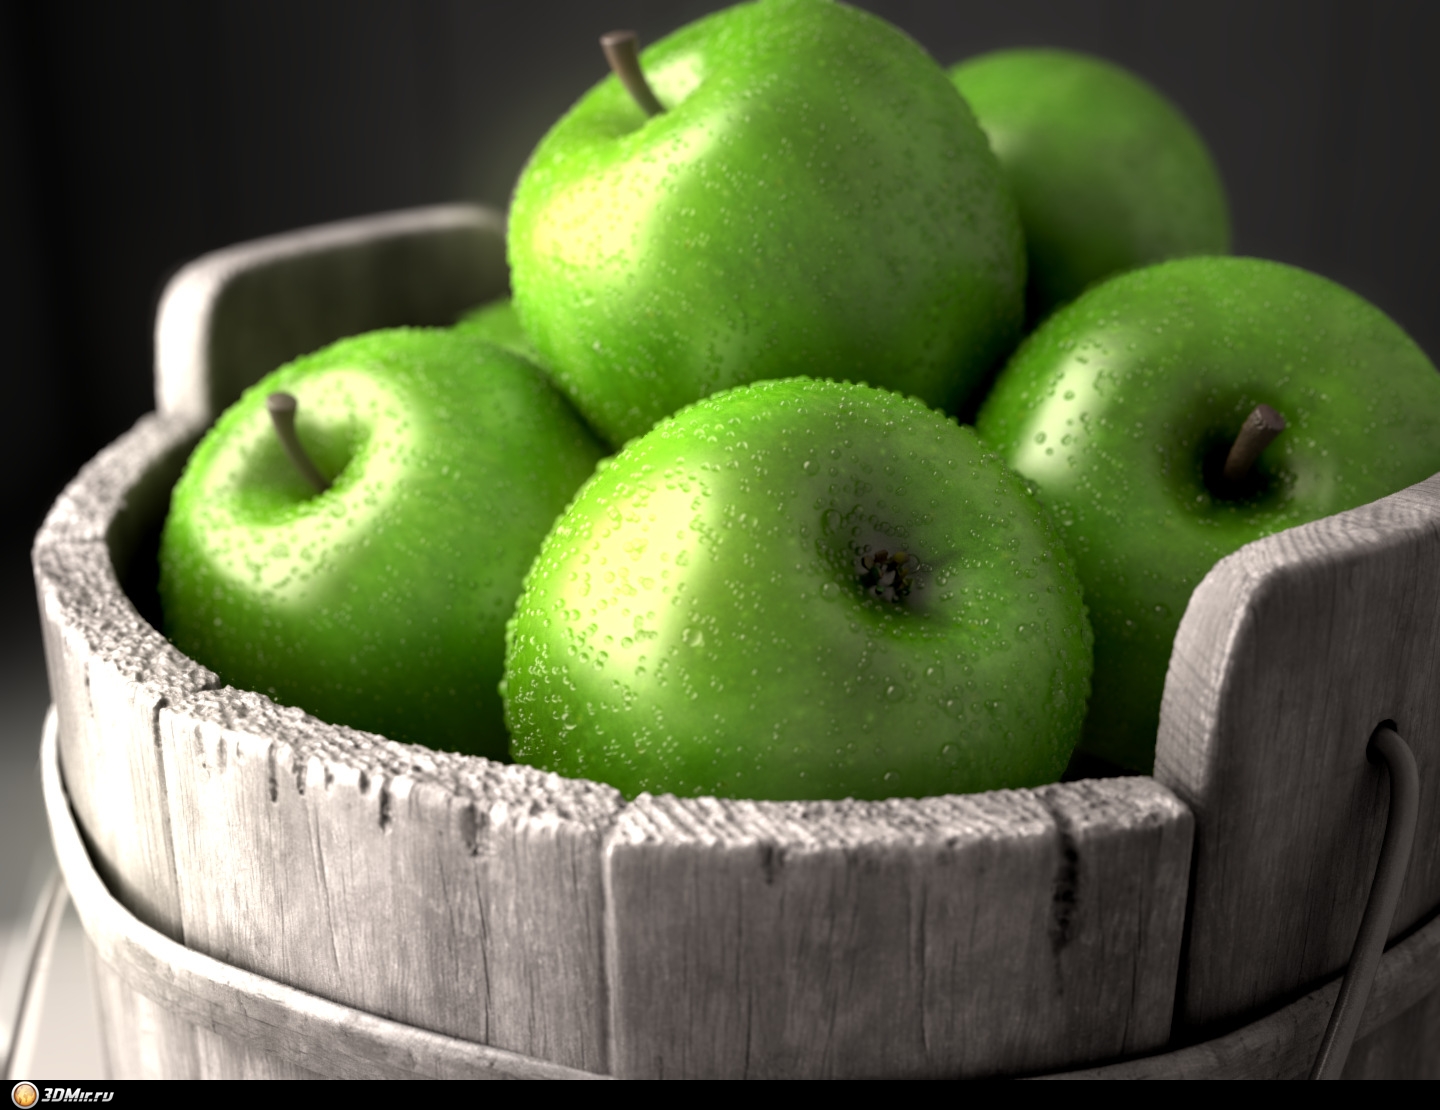 Apples texture background